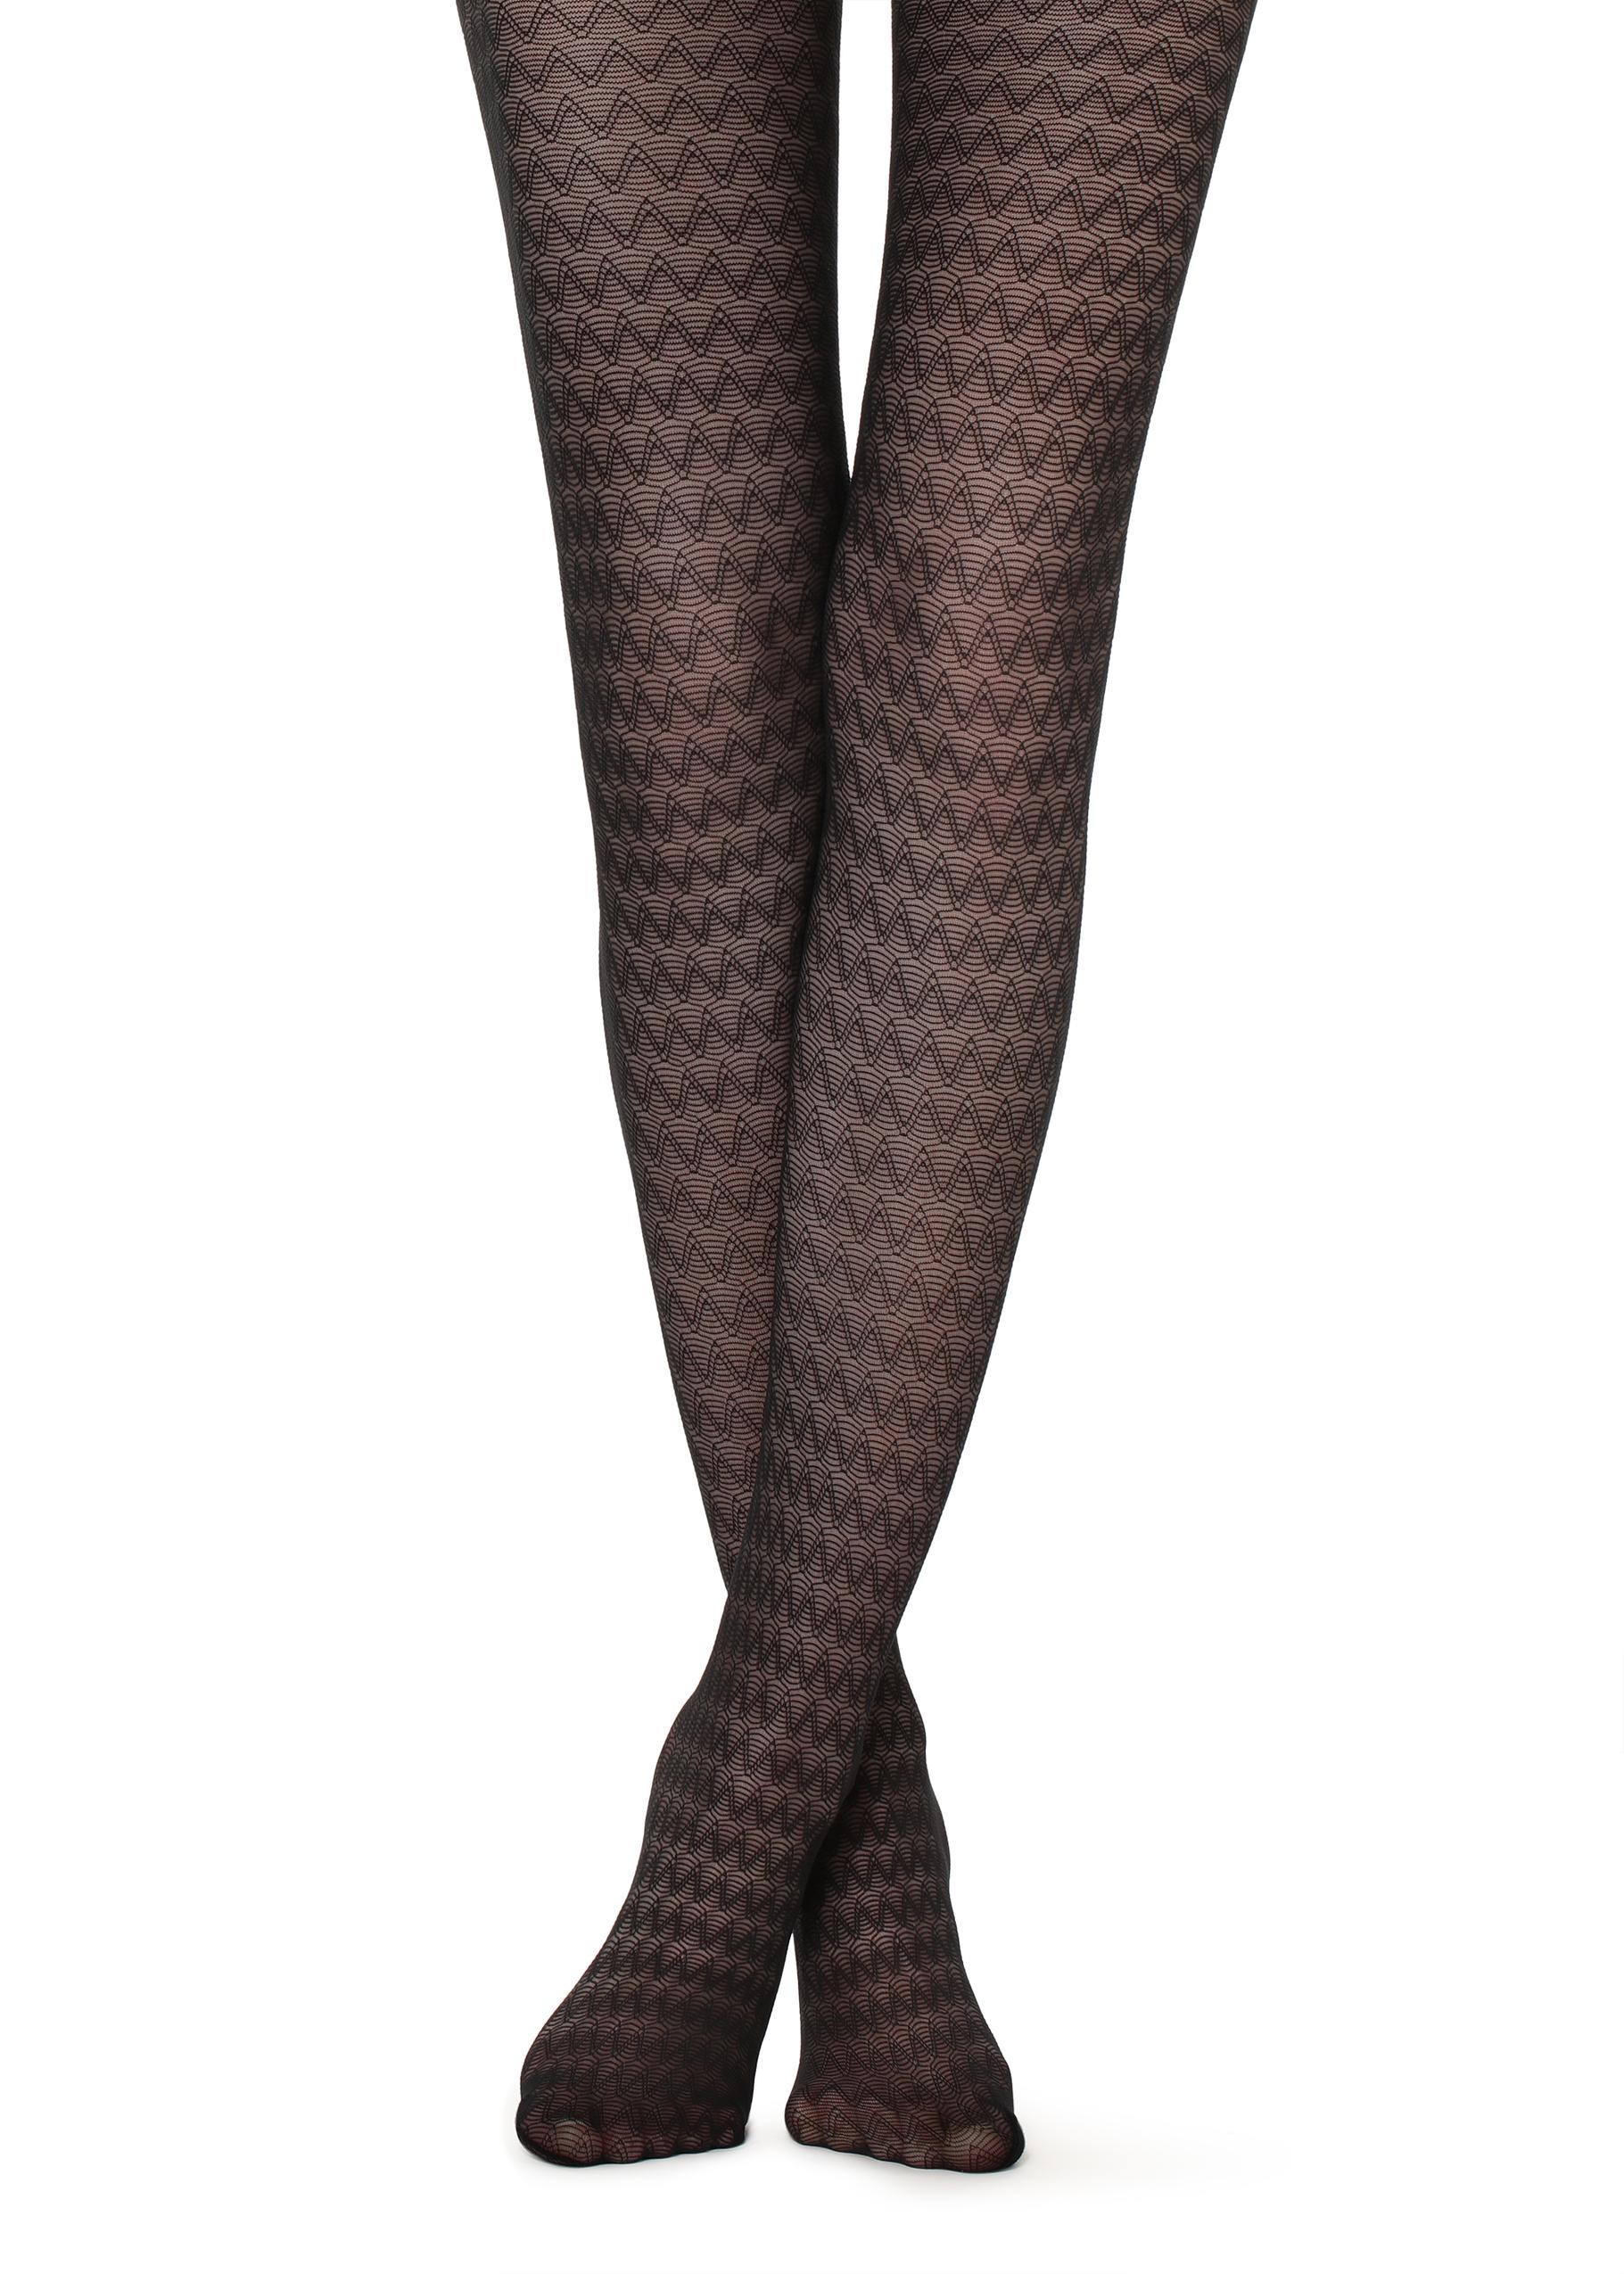 Animal-patterned tights - Calzedonia